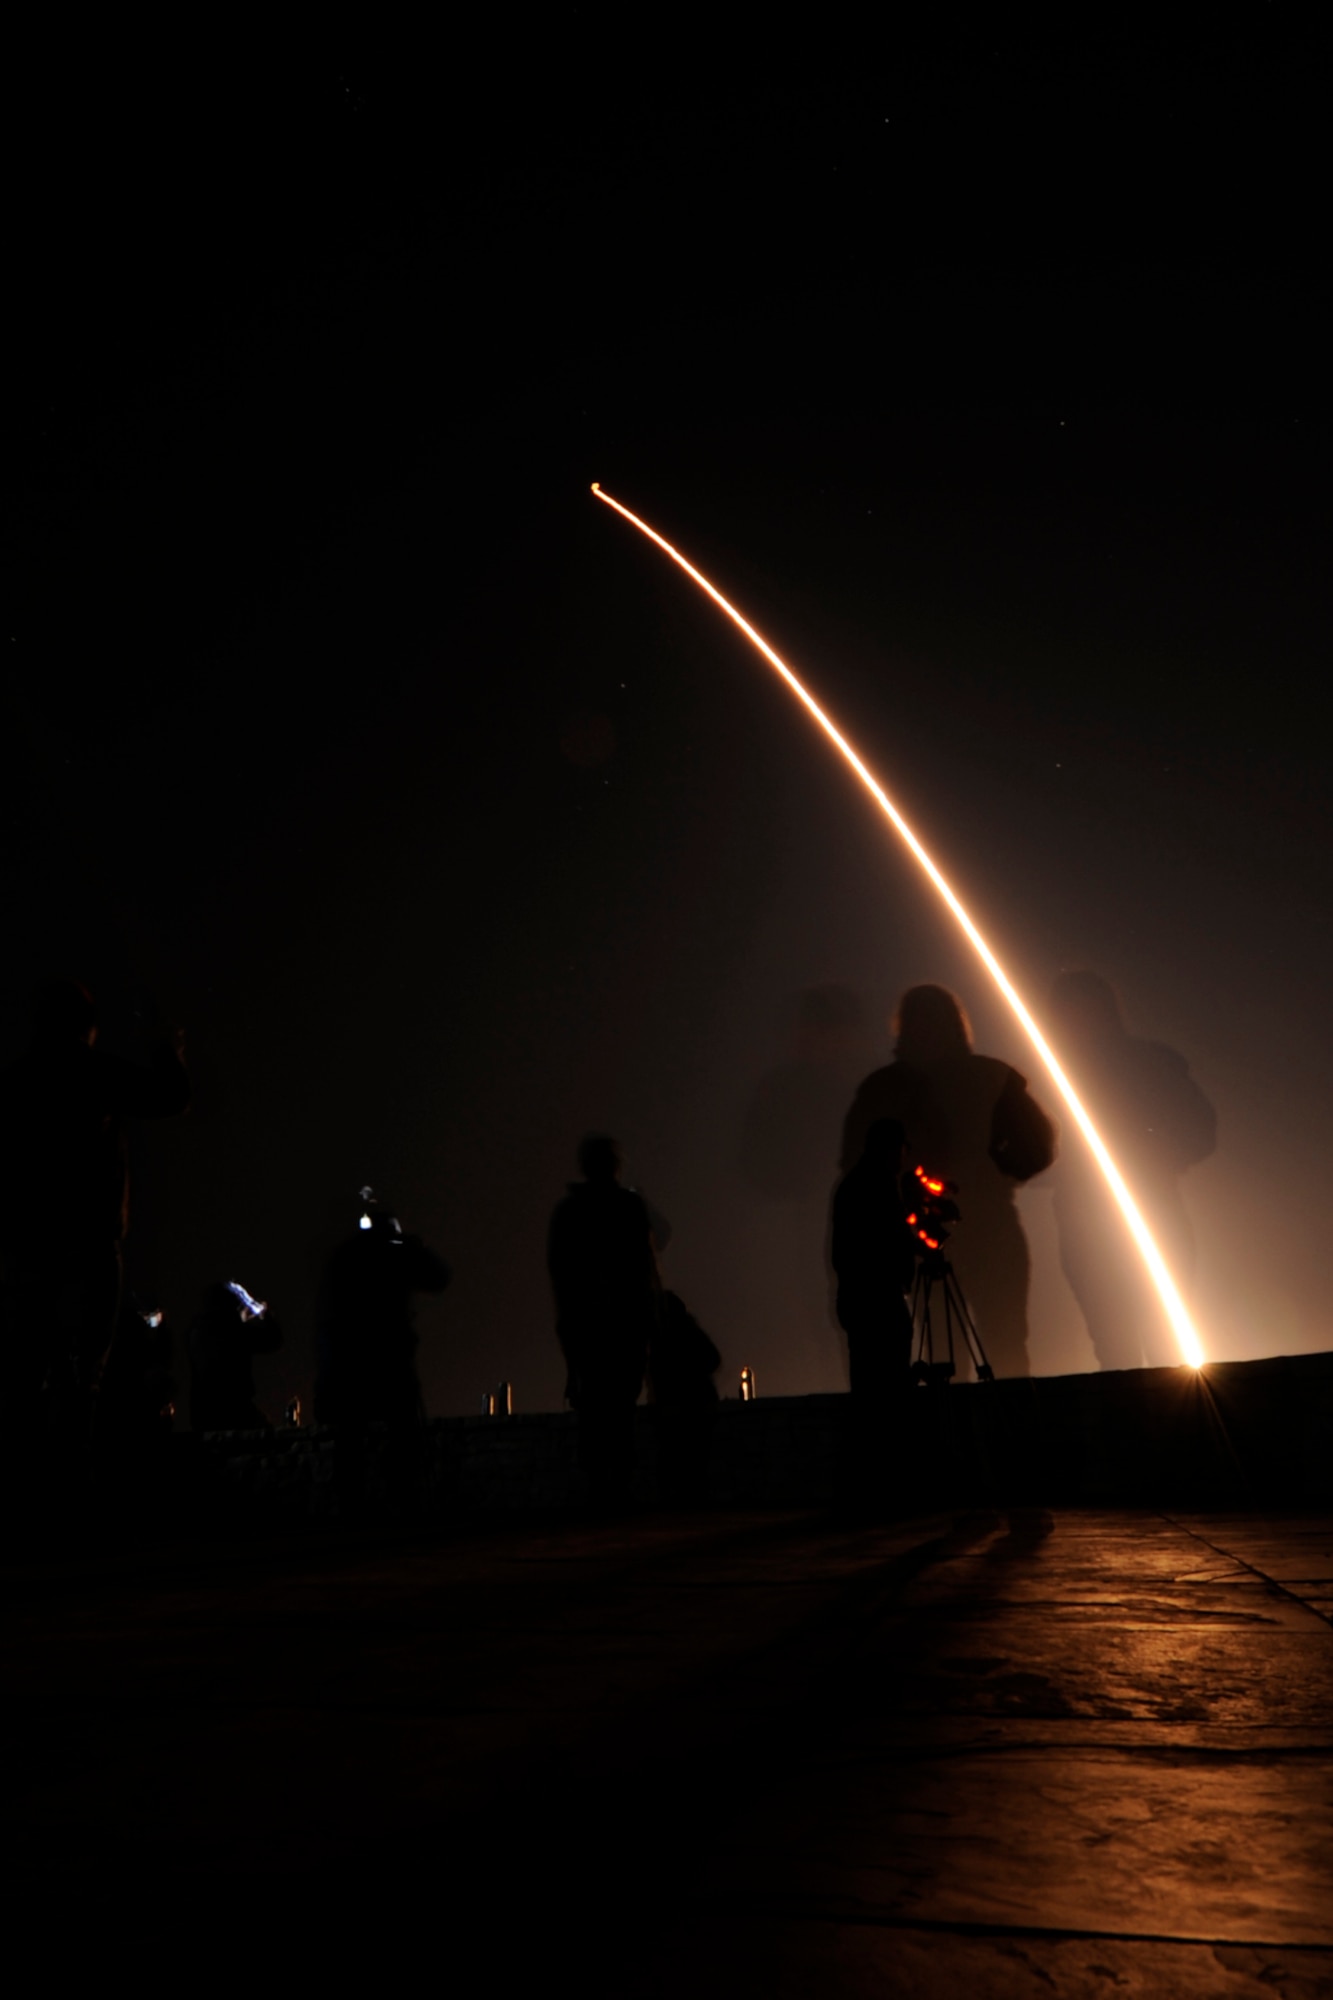 An Air Force Global Strike Command Minuteman III intercontinental ballistic missile equipped with a simulated re-entry vehicle was launched during an operational test at 3:07 a.m. Wednesday, Nov. 14, from Launch Facility 10 on North Vandenberg. (U.S. Air Force photo/Levi Riendeau)